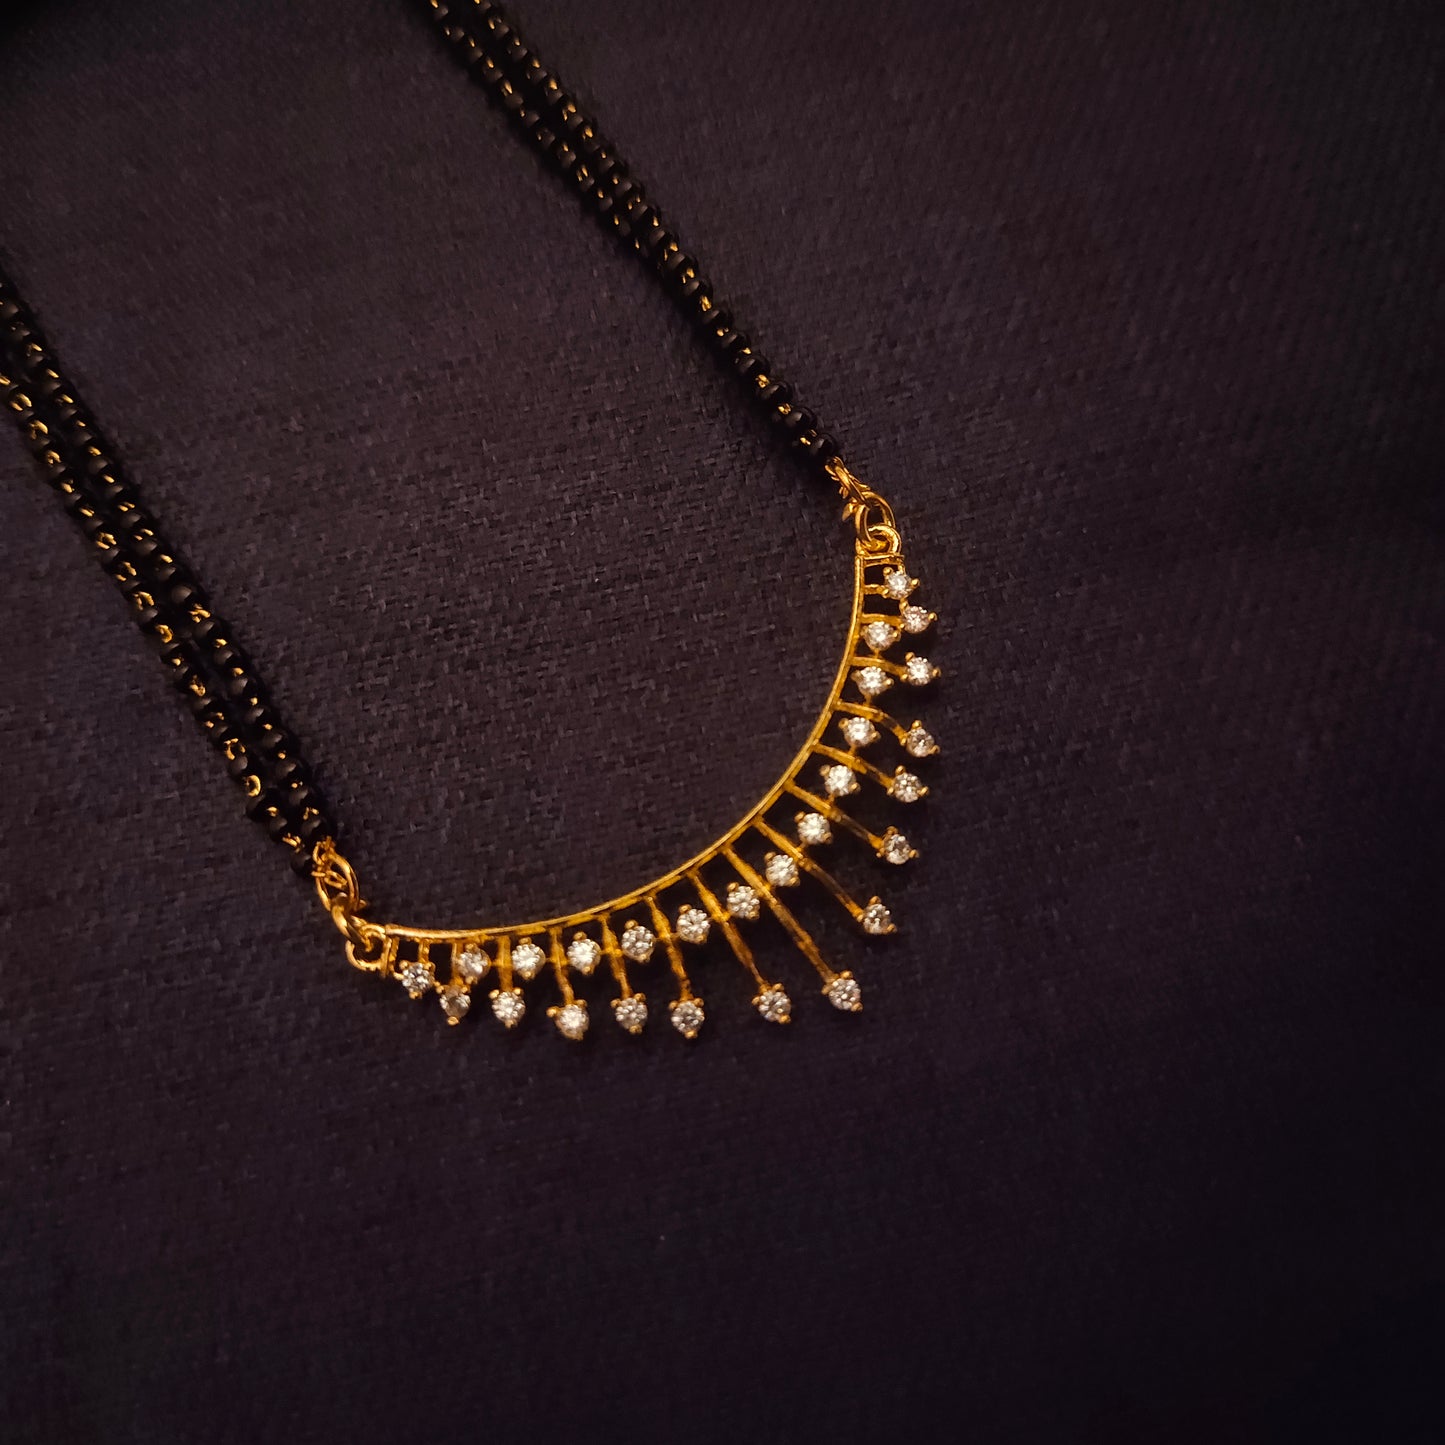 "Luxe Love: The Radiance of Gold and Diamonds in a Stunning Mangalsutra Design"